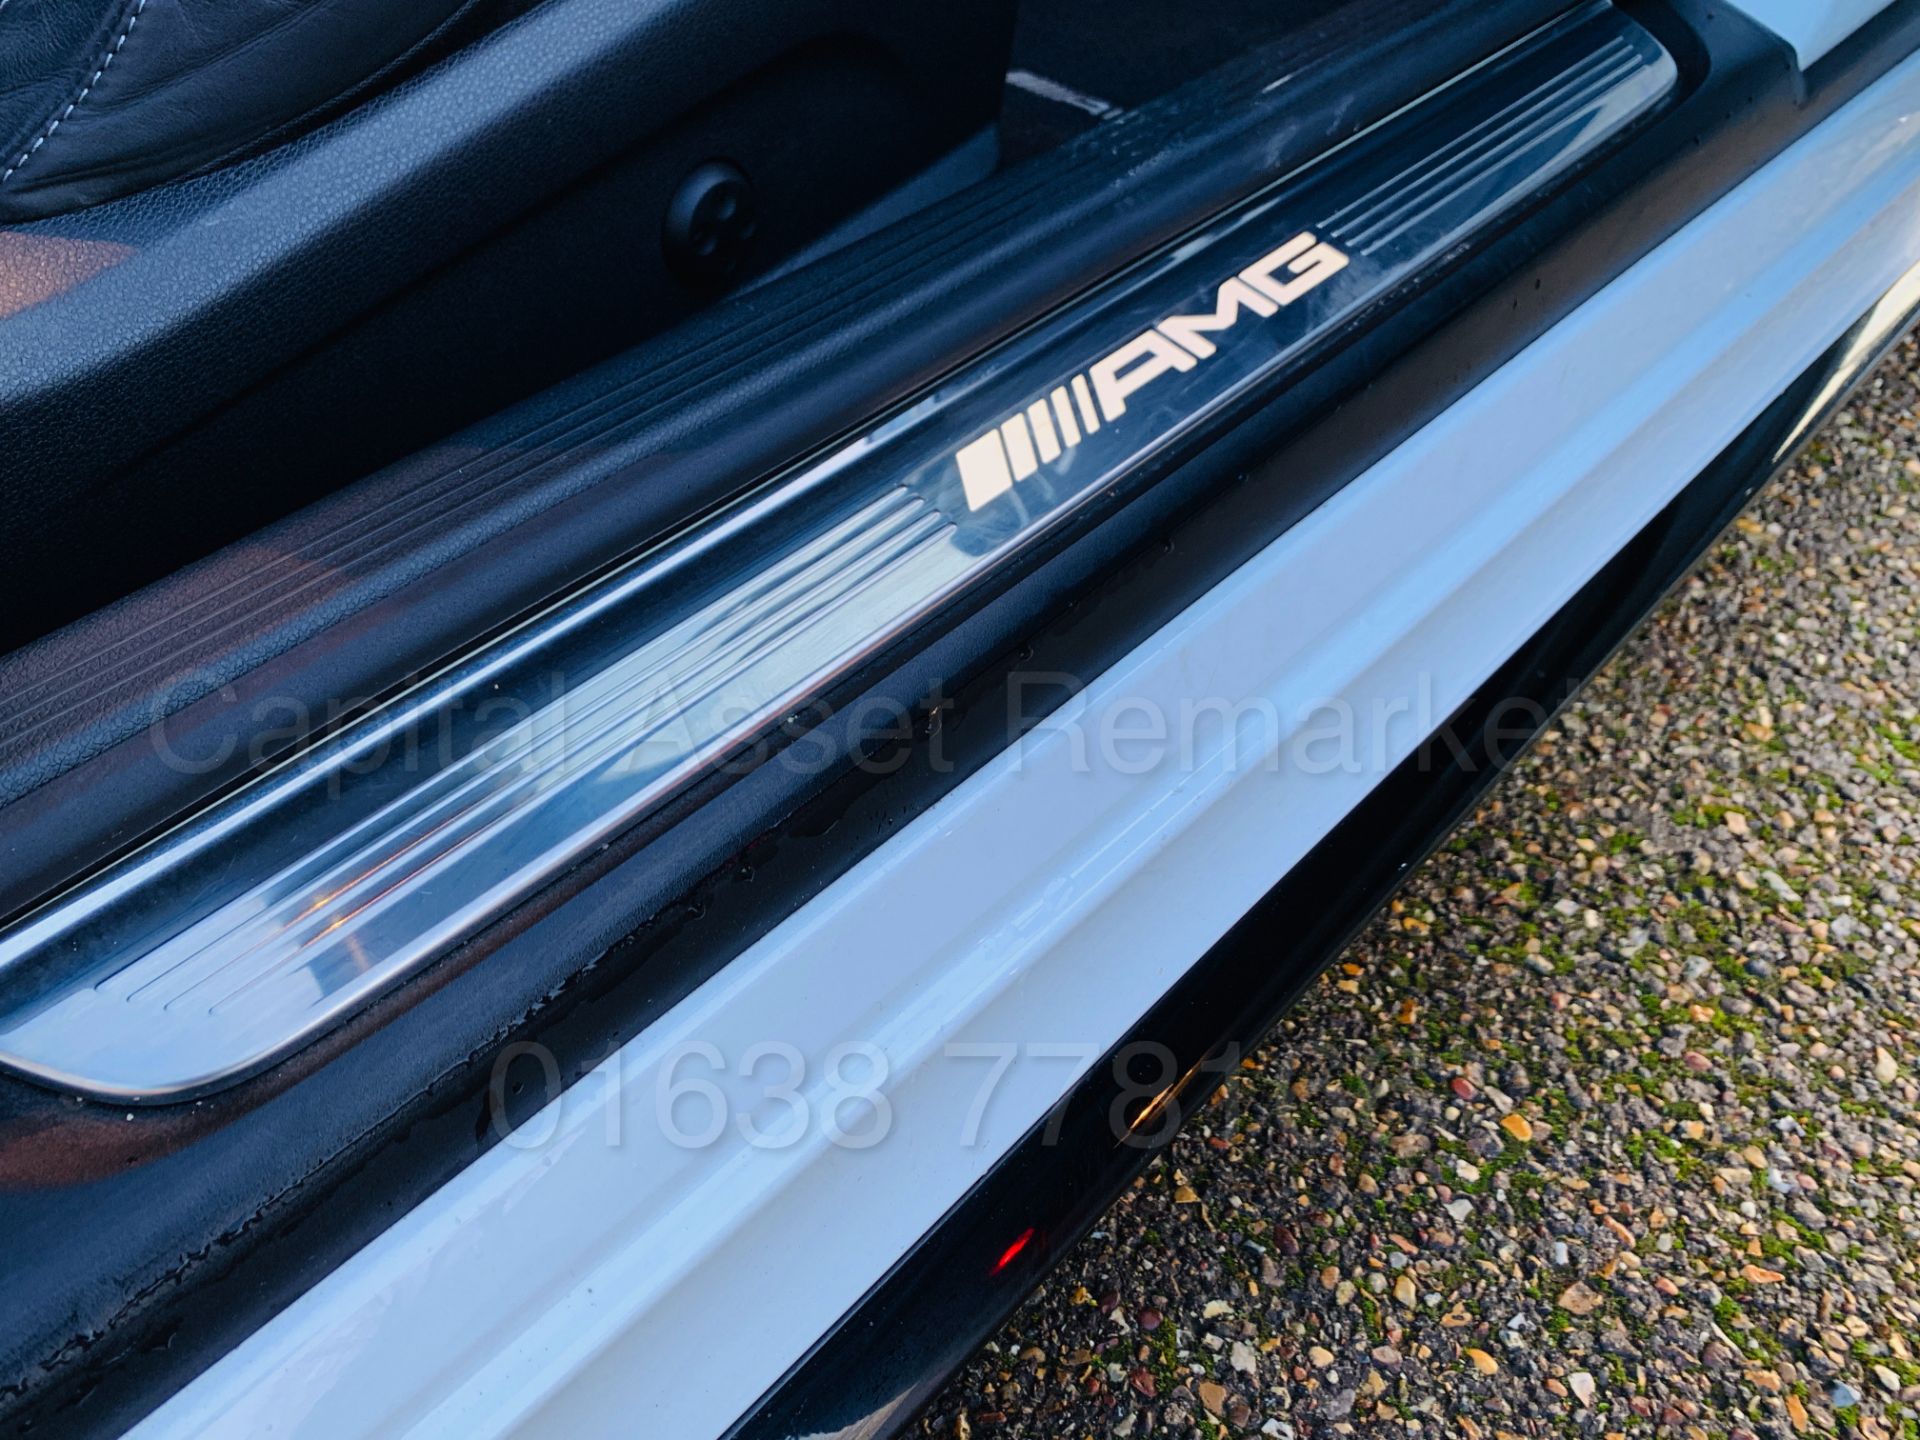 (On Sale) MERCEDES-BENZ AMG C63-S *CABRIOLET* (67 REG) '4.0 BI-TURBO -510 BHP - AUTO' *FULLY LOADED* - Image 60 of 79